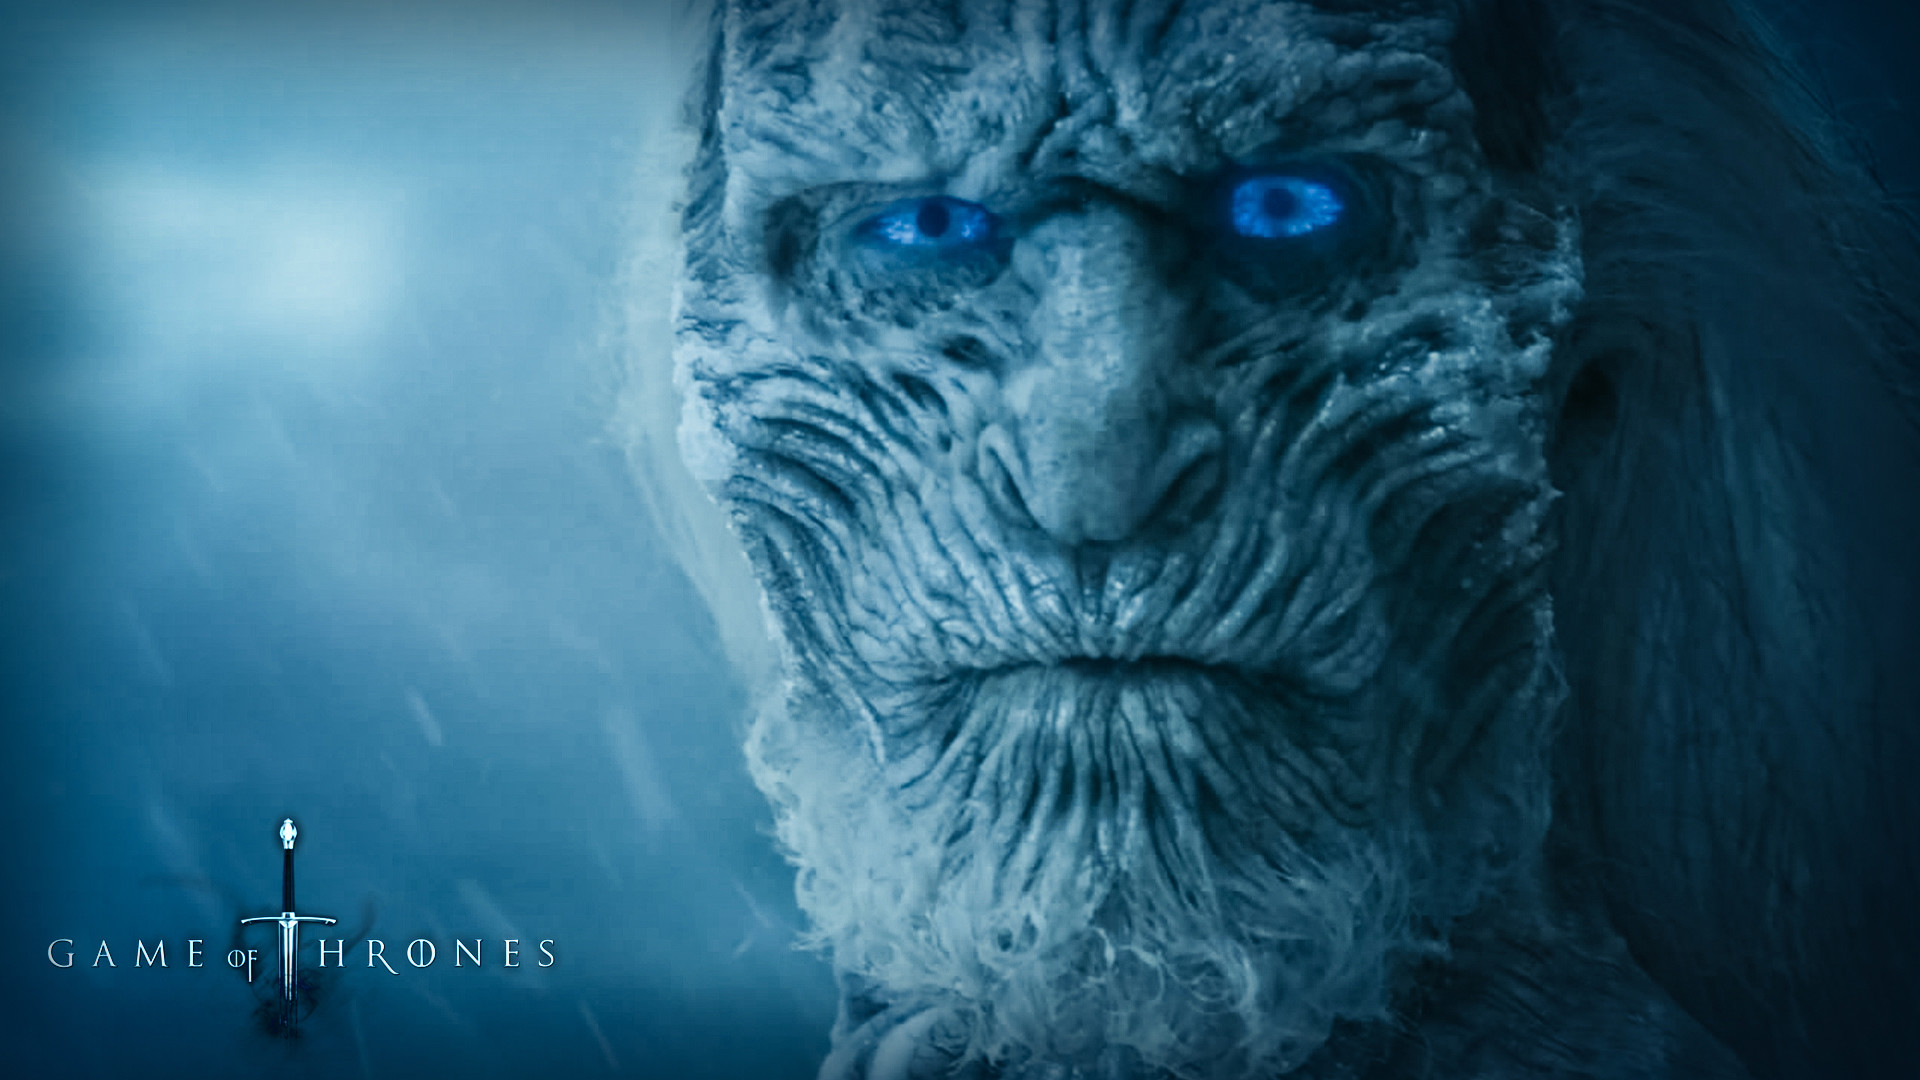 Game of Thrones Season 4 – Wallpaper, High Definition, High Quality